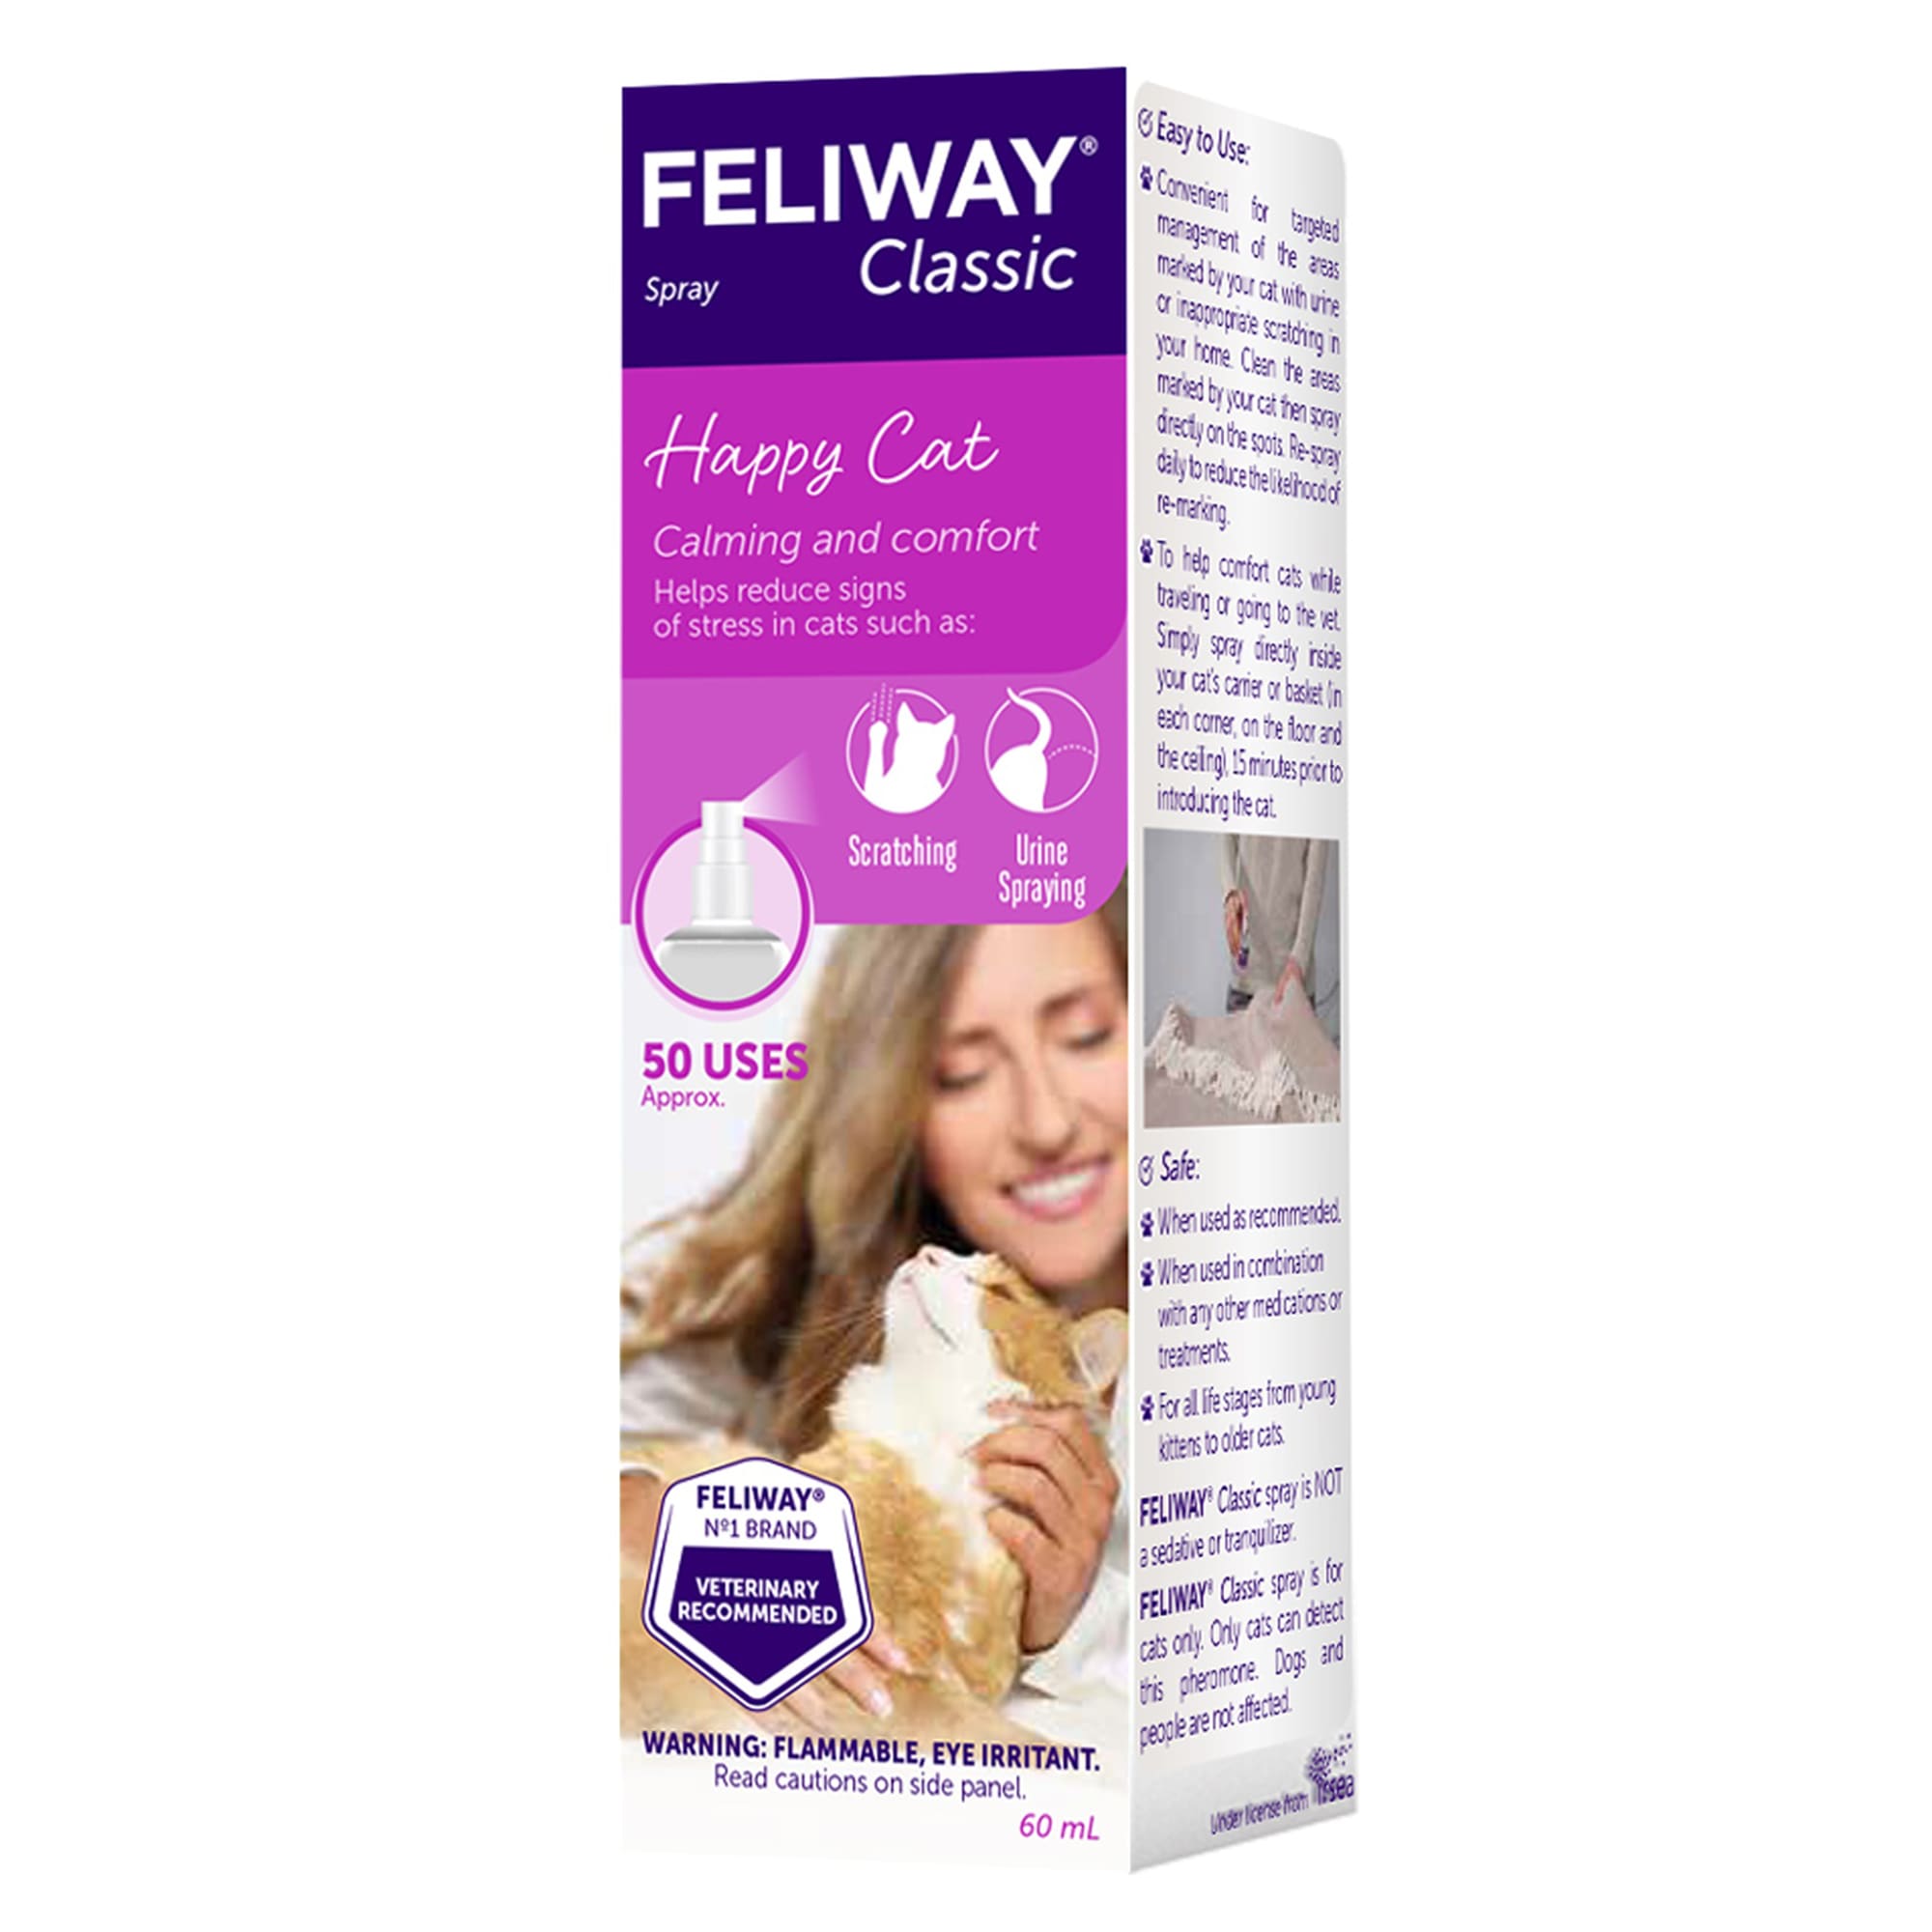 Animalerie pour chat : Feliway Classic - Spray Voyage (60ml)